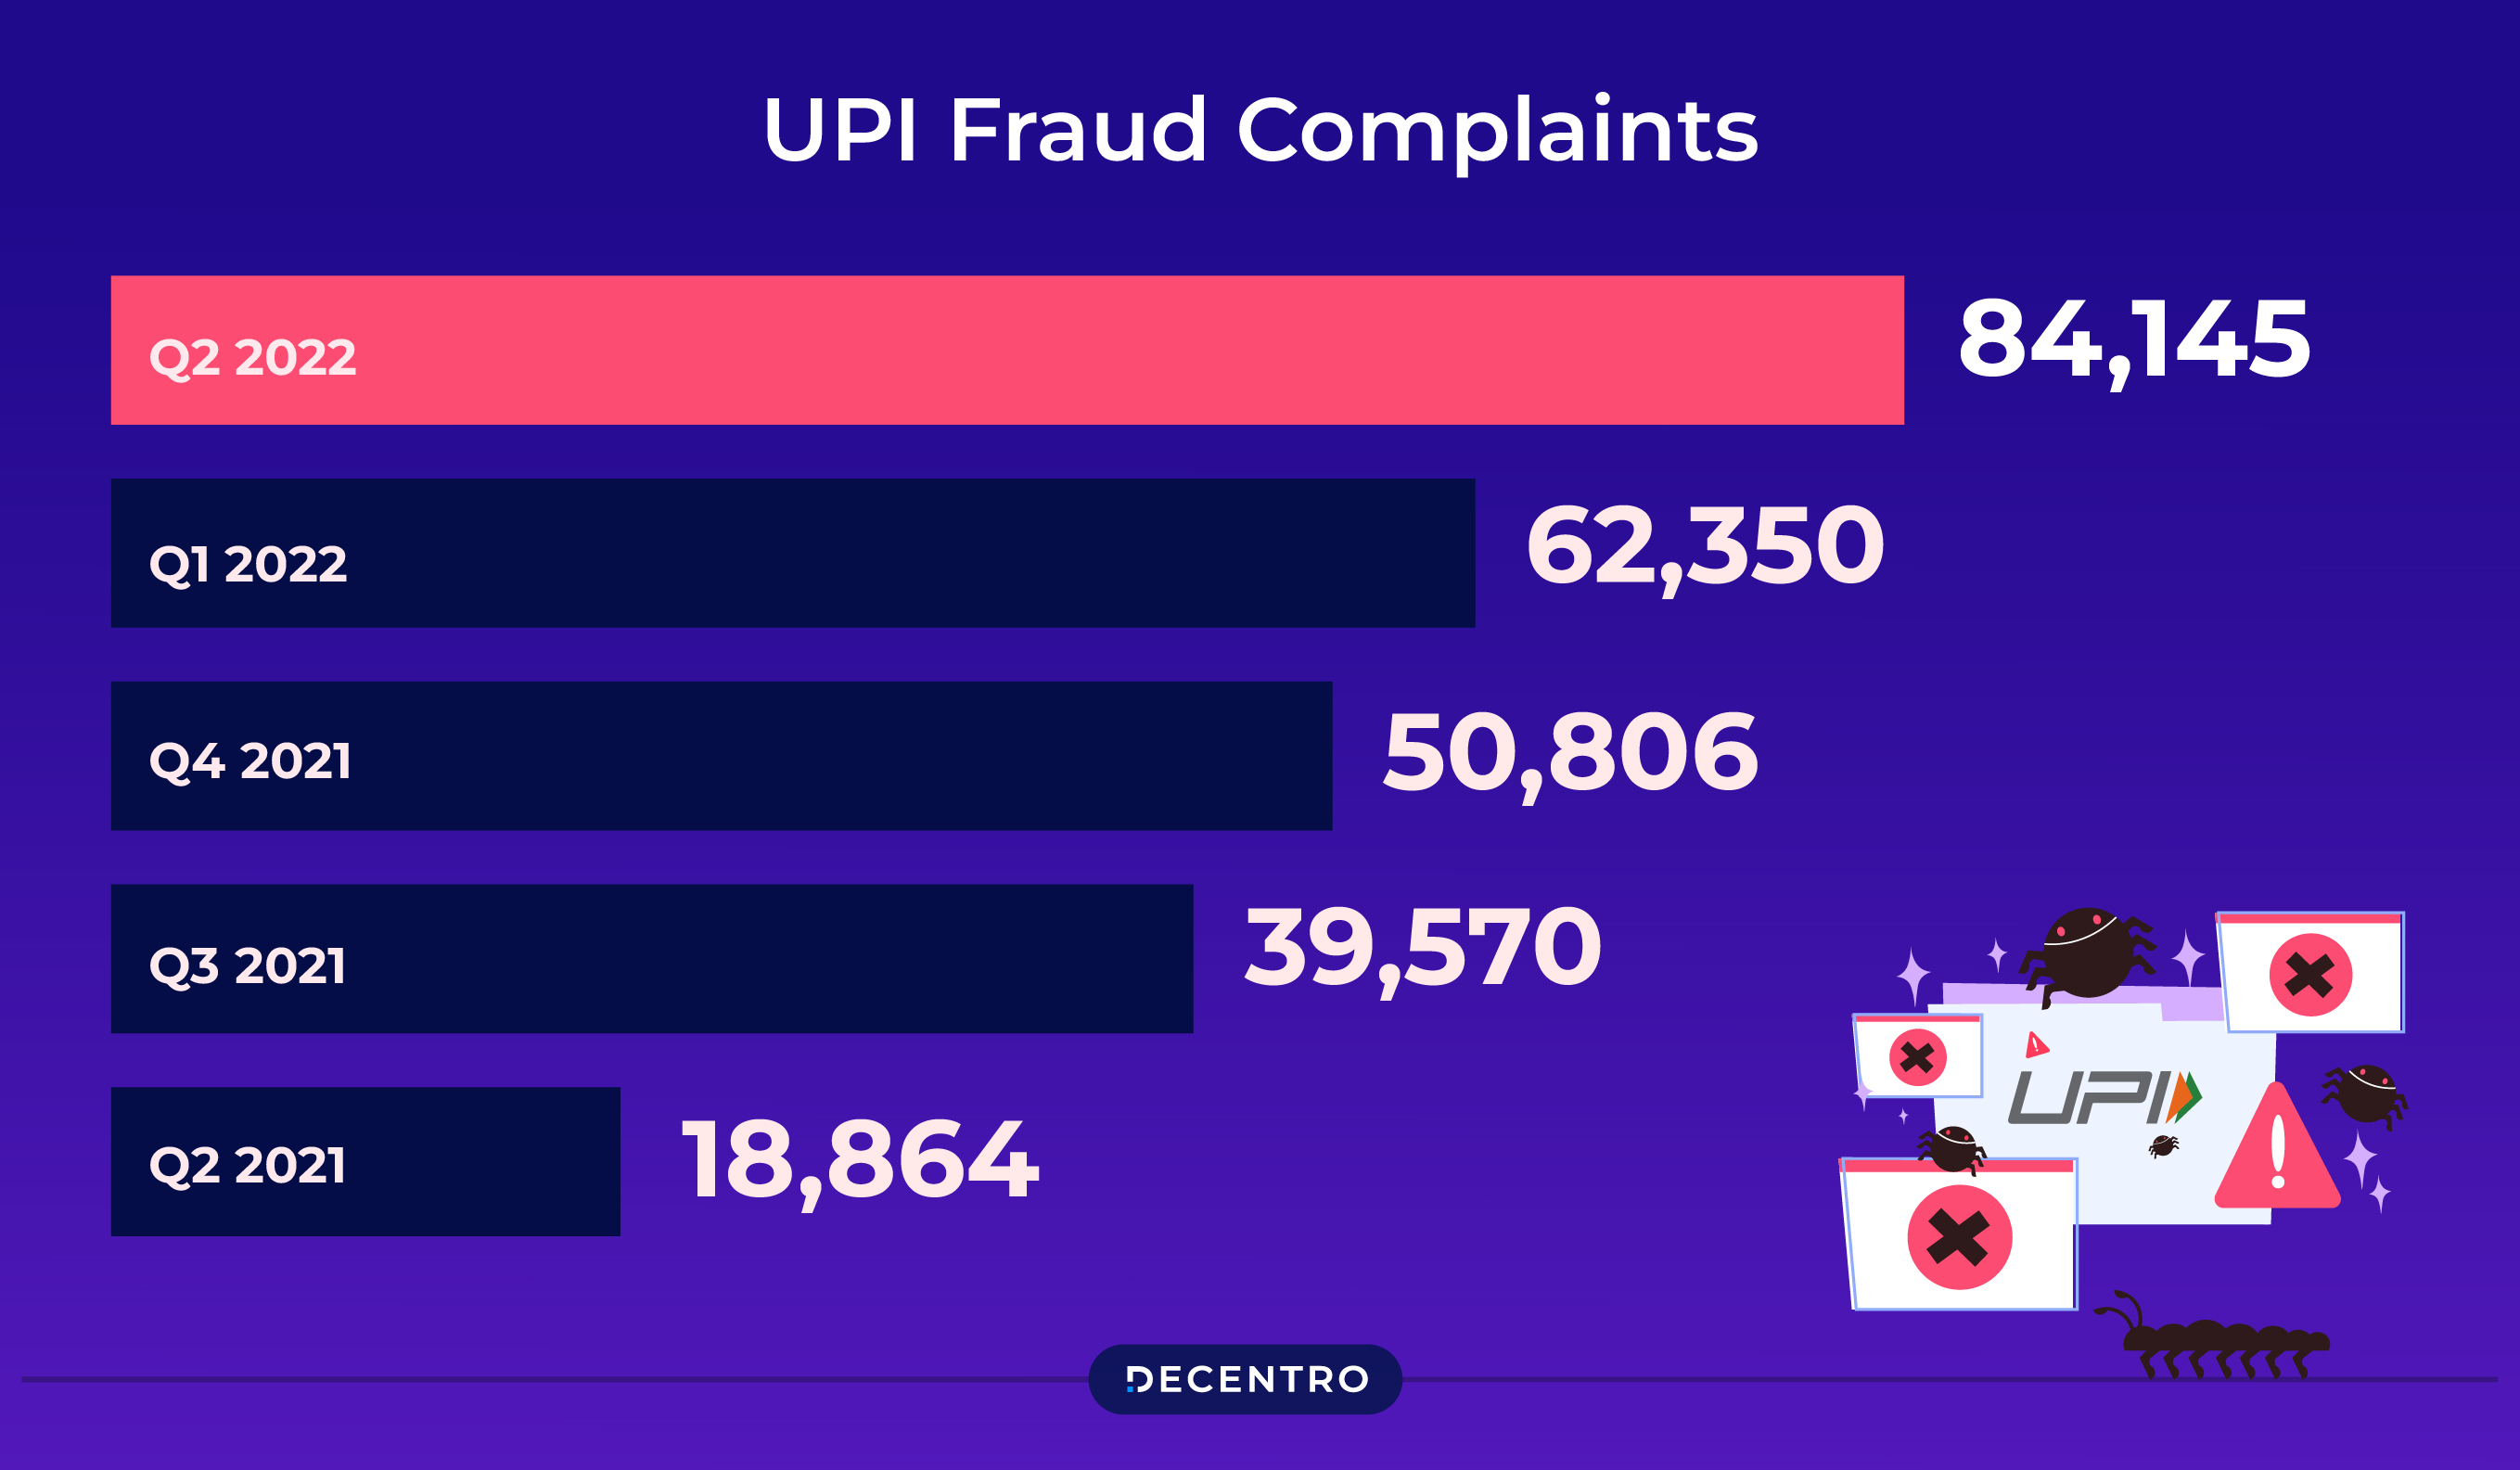 Snippet of growth of UPI Fraud complaints